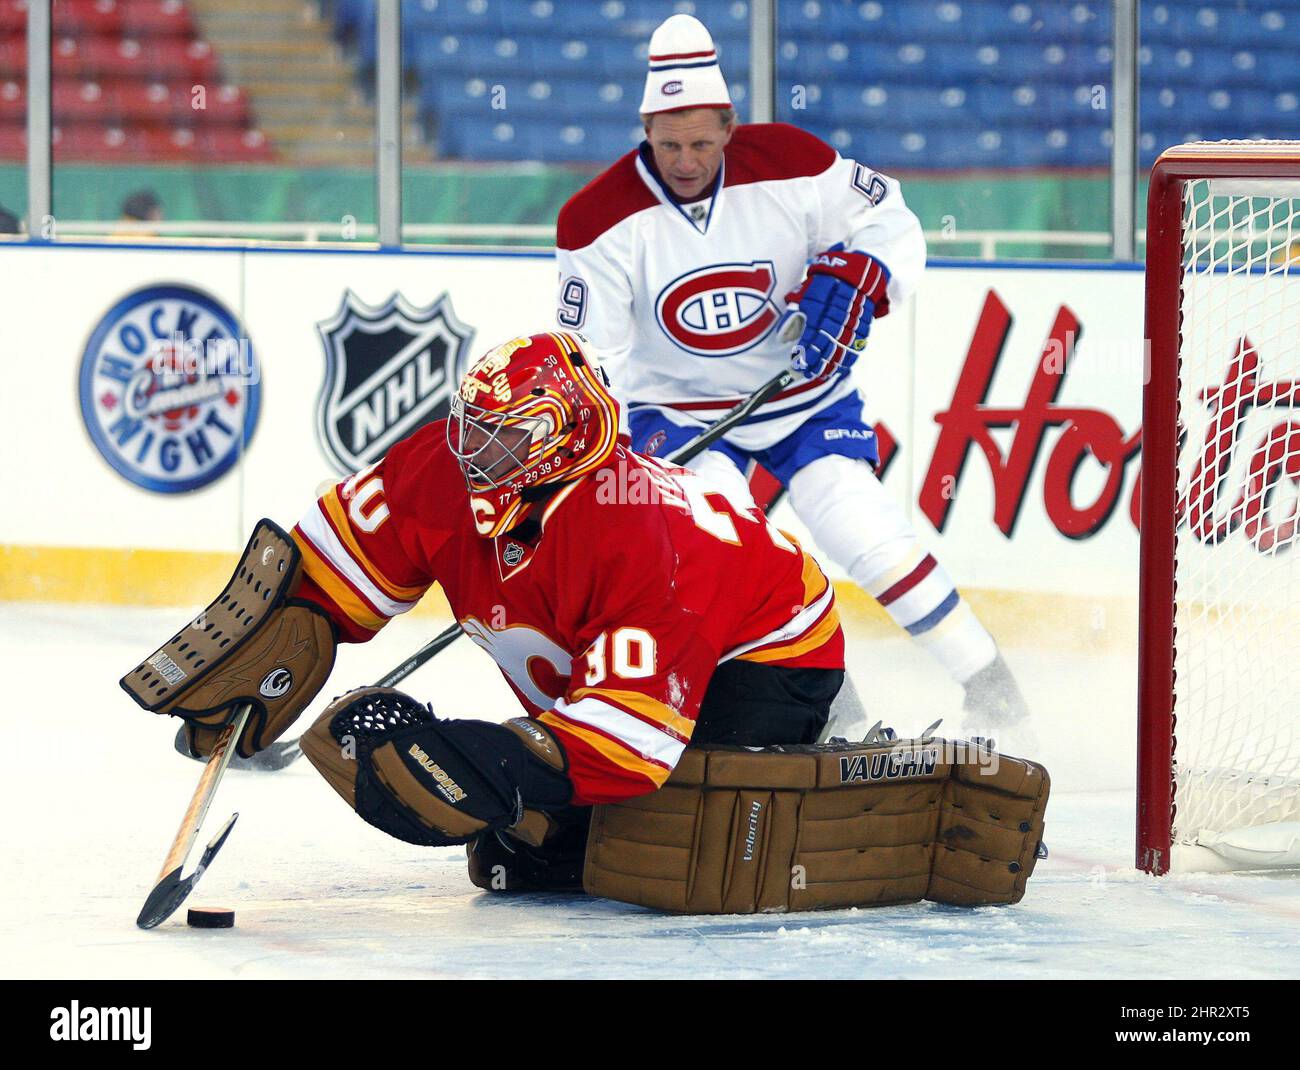 2011 NHL Heritage Classic: Canadiens @ Flames 